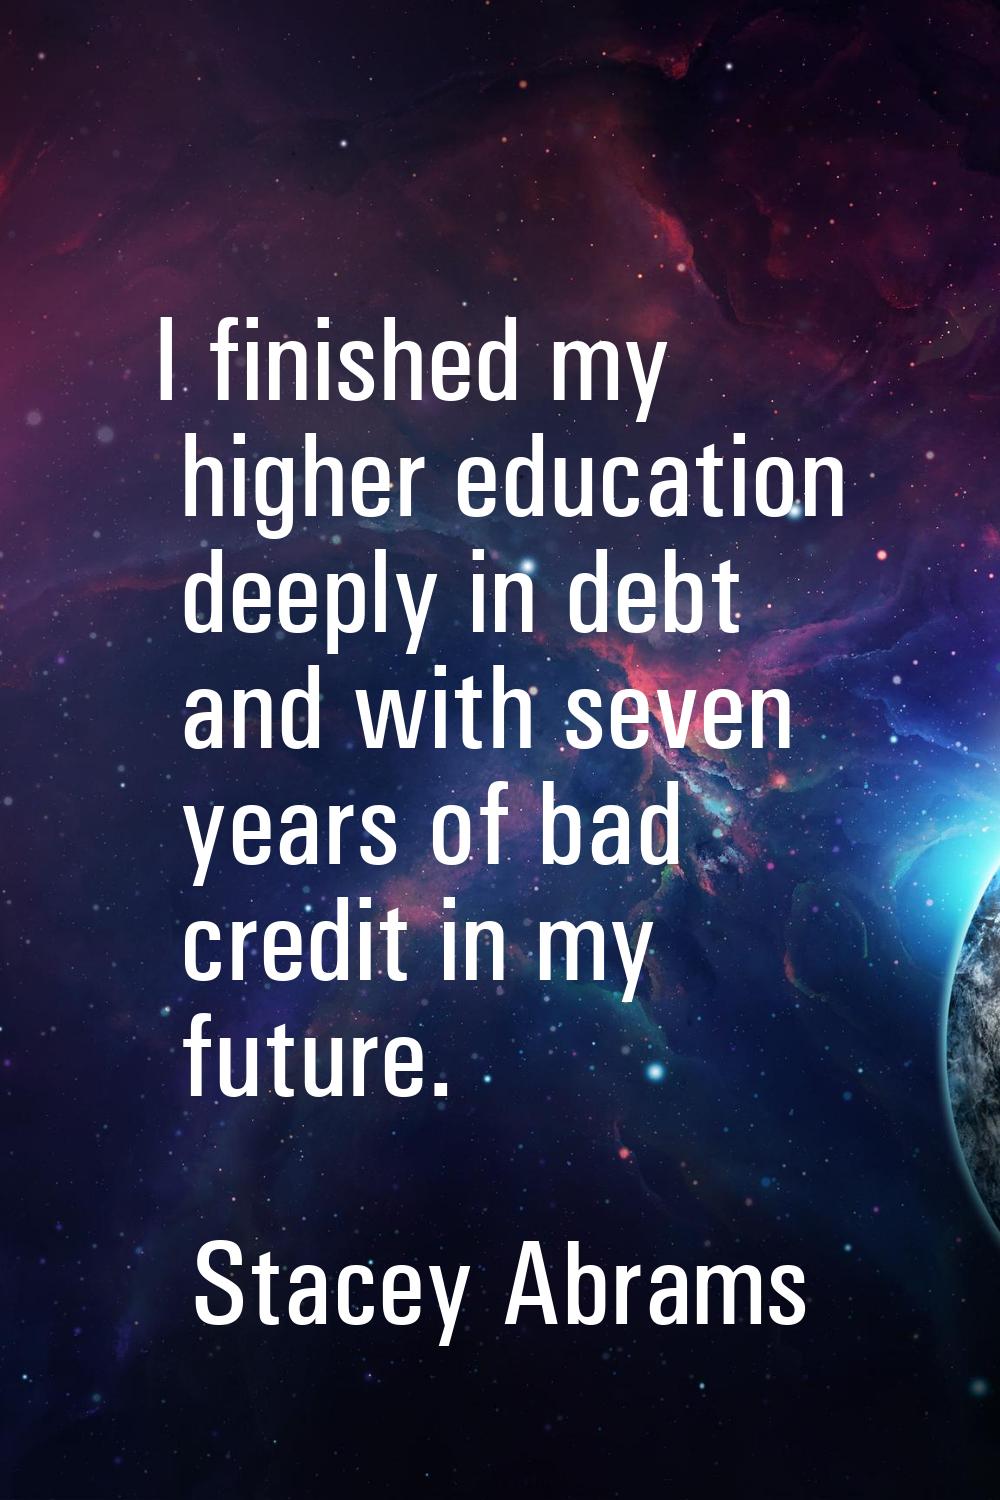 I finished my higher education deeply in debt and with seven years of bad credit in my future.